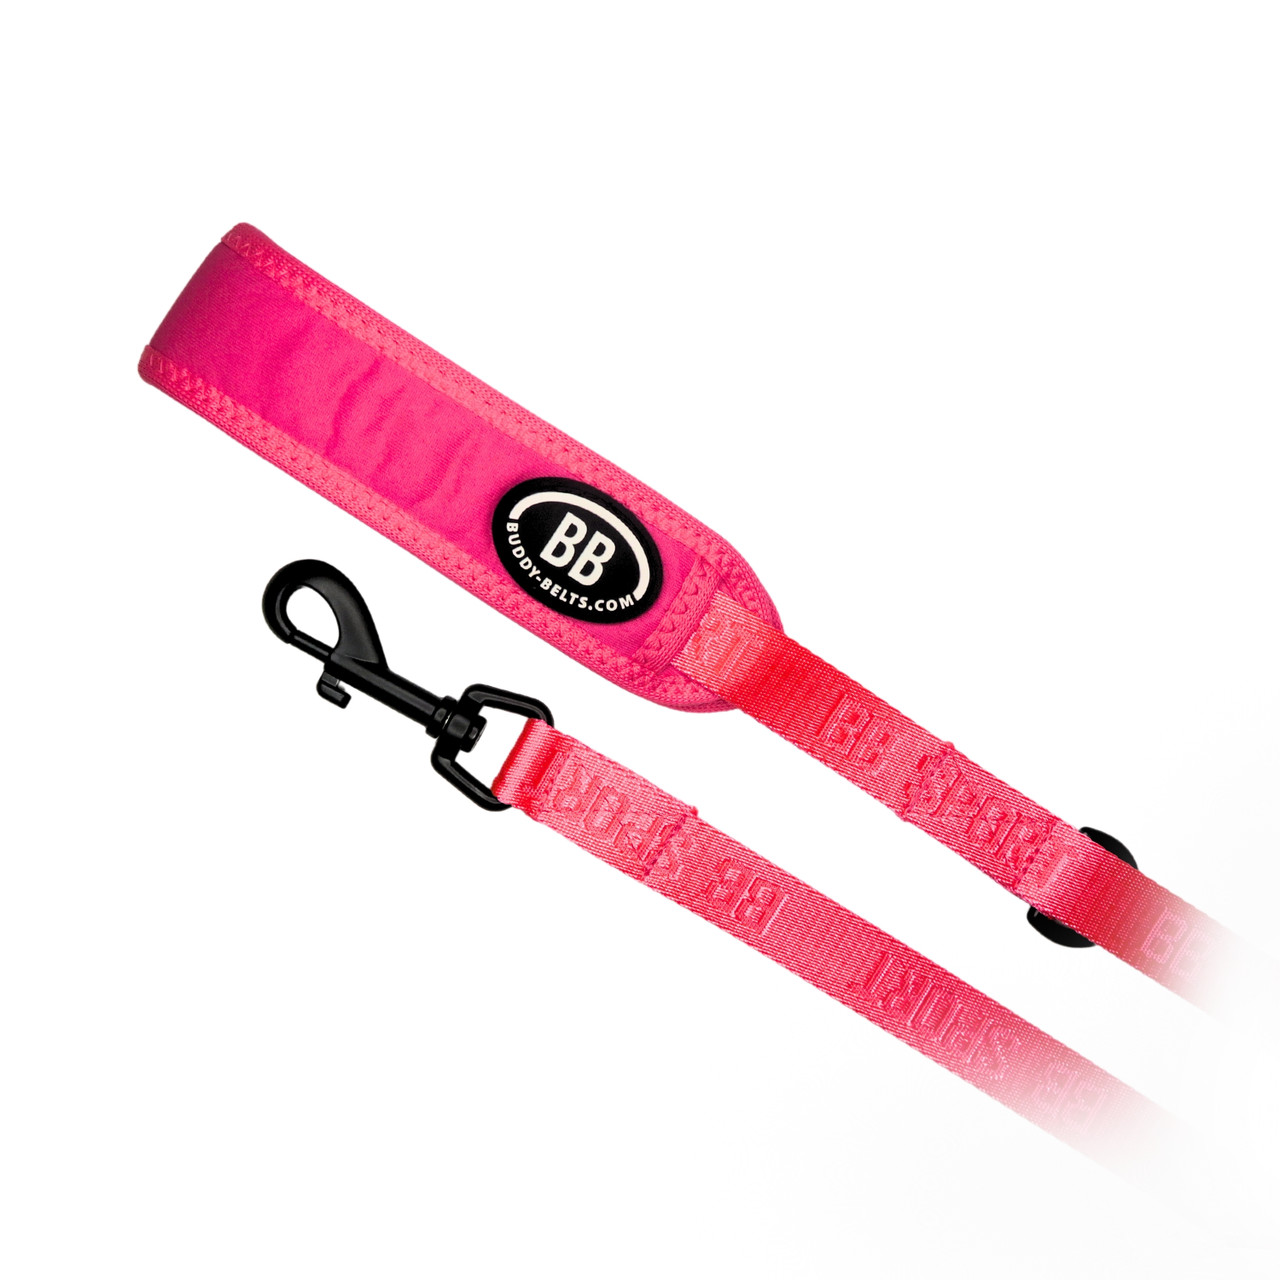 Buddy Belt Sports Harnesses - Vibrant Collection